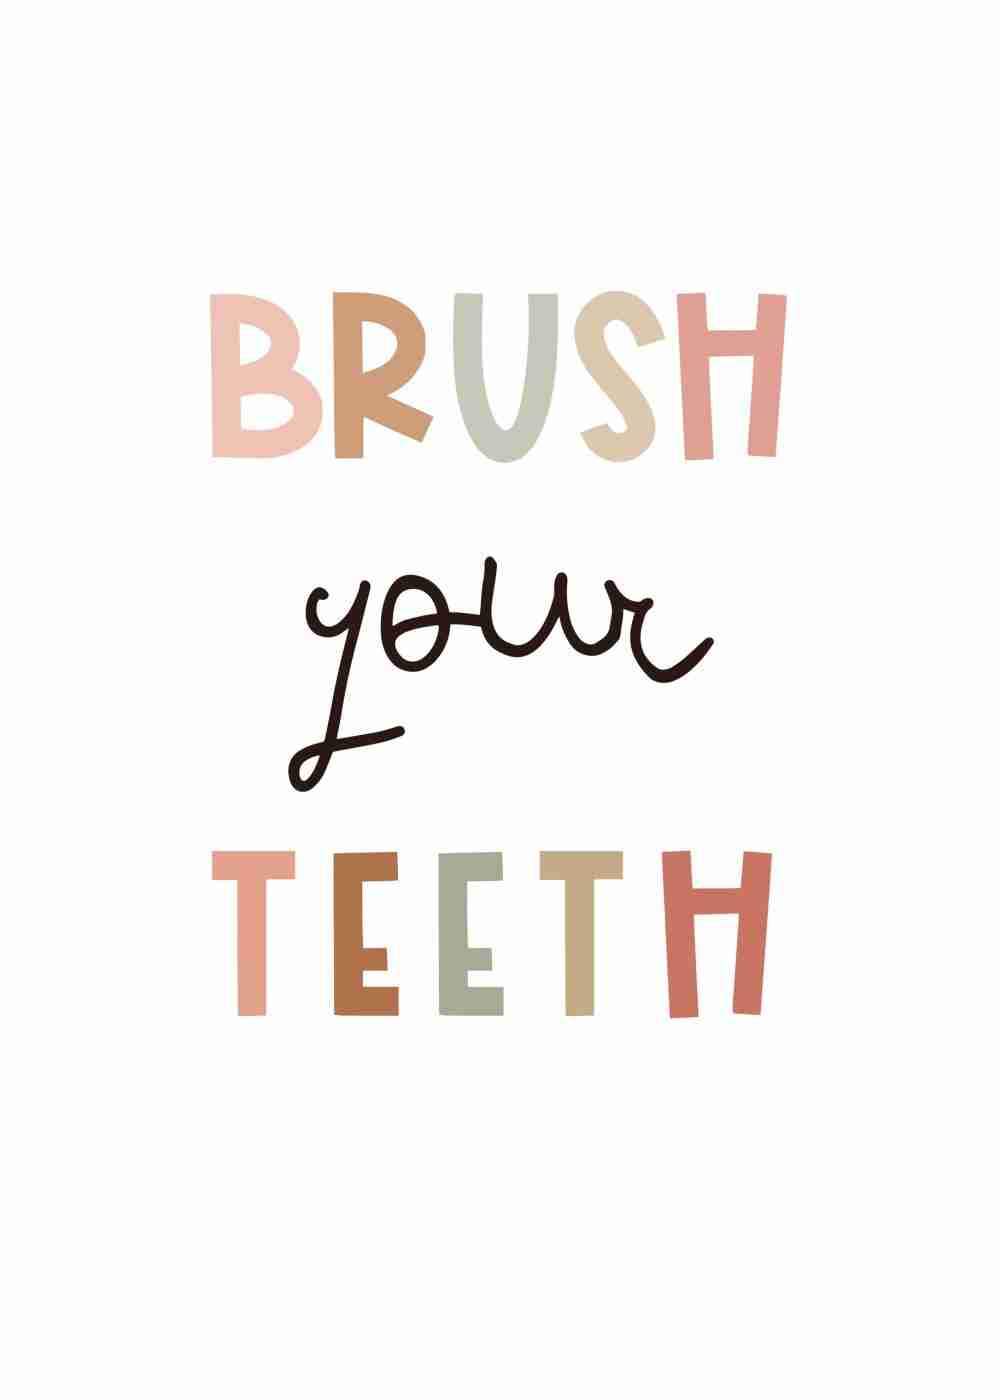 Brush Your Teeth Poster